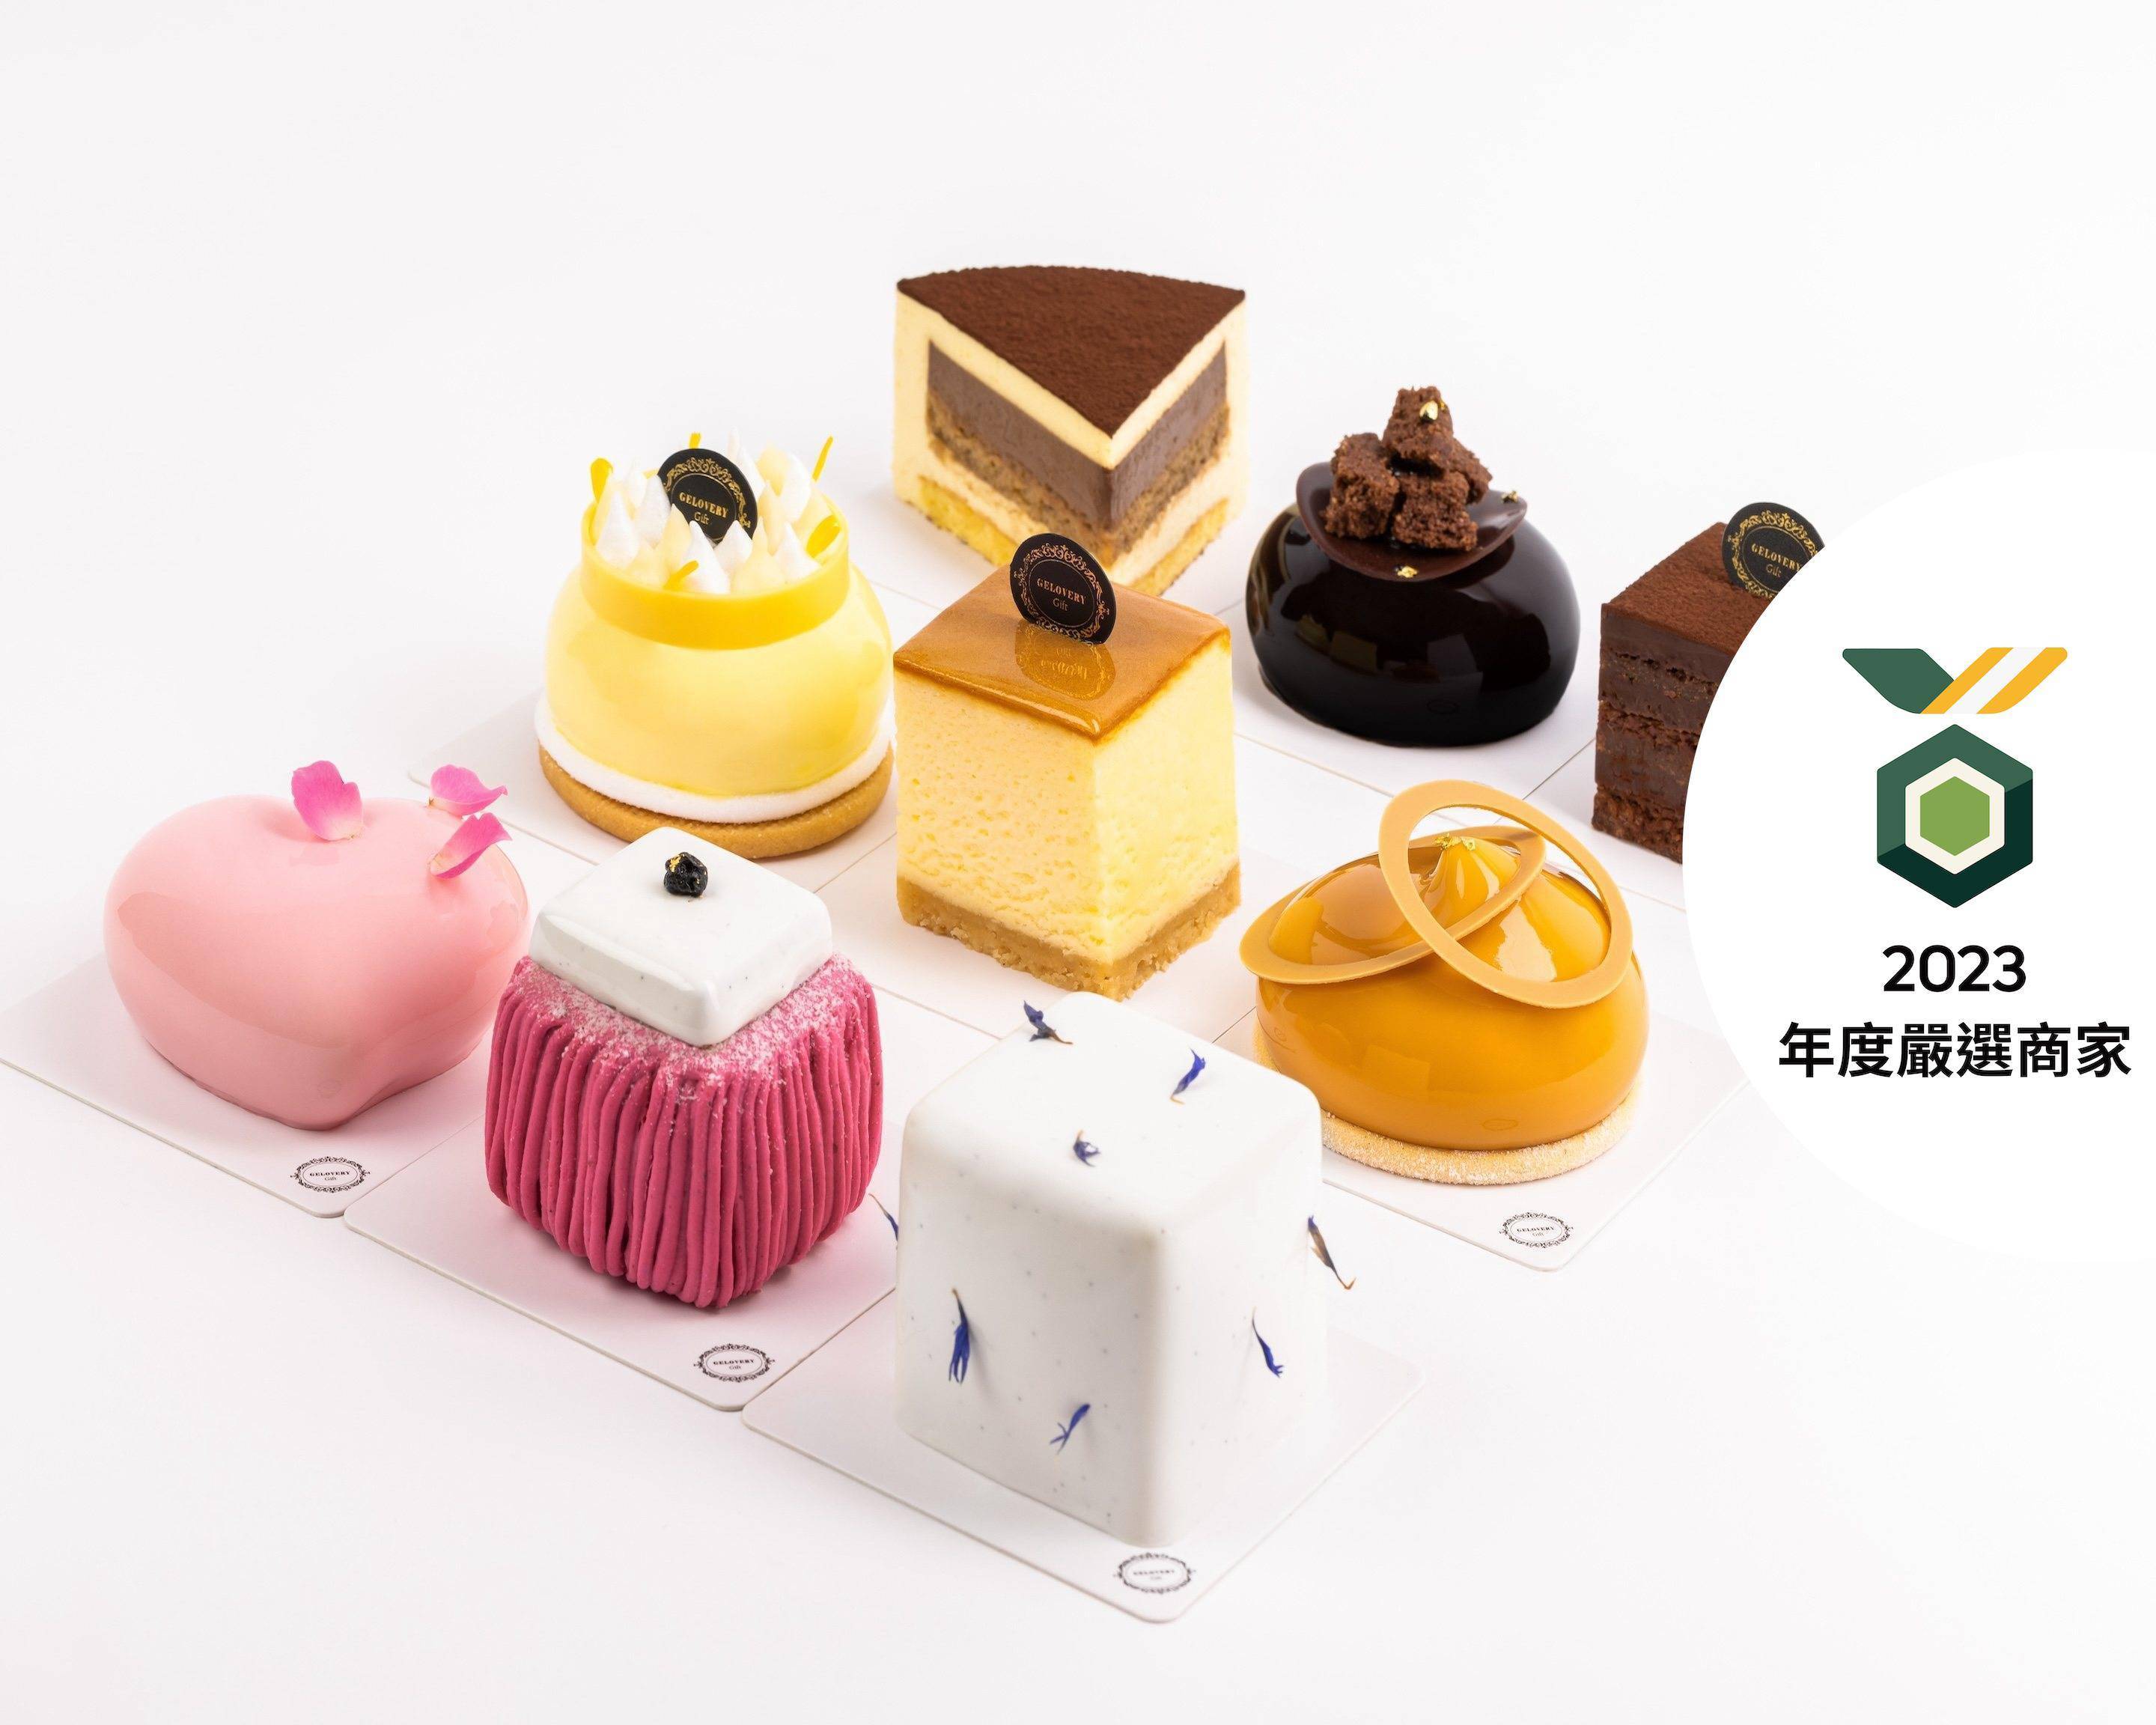 Gelovery Gift Menu Delivery in Taipei | Delivery Menu & Prices